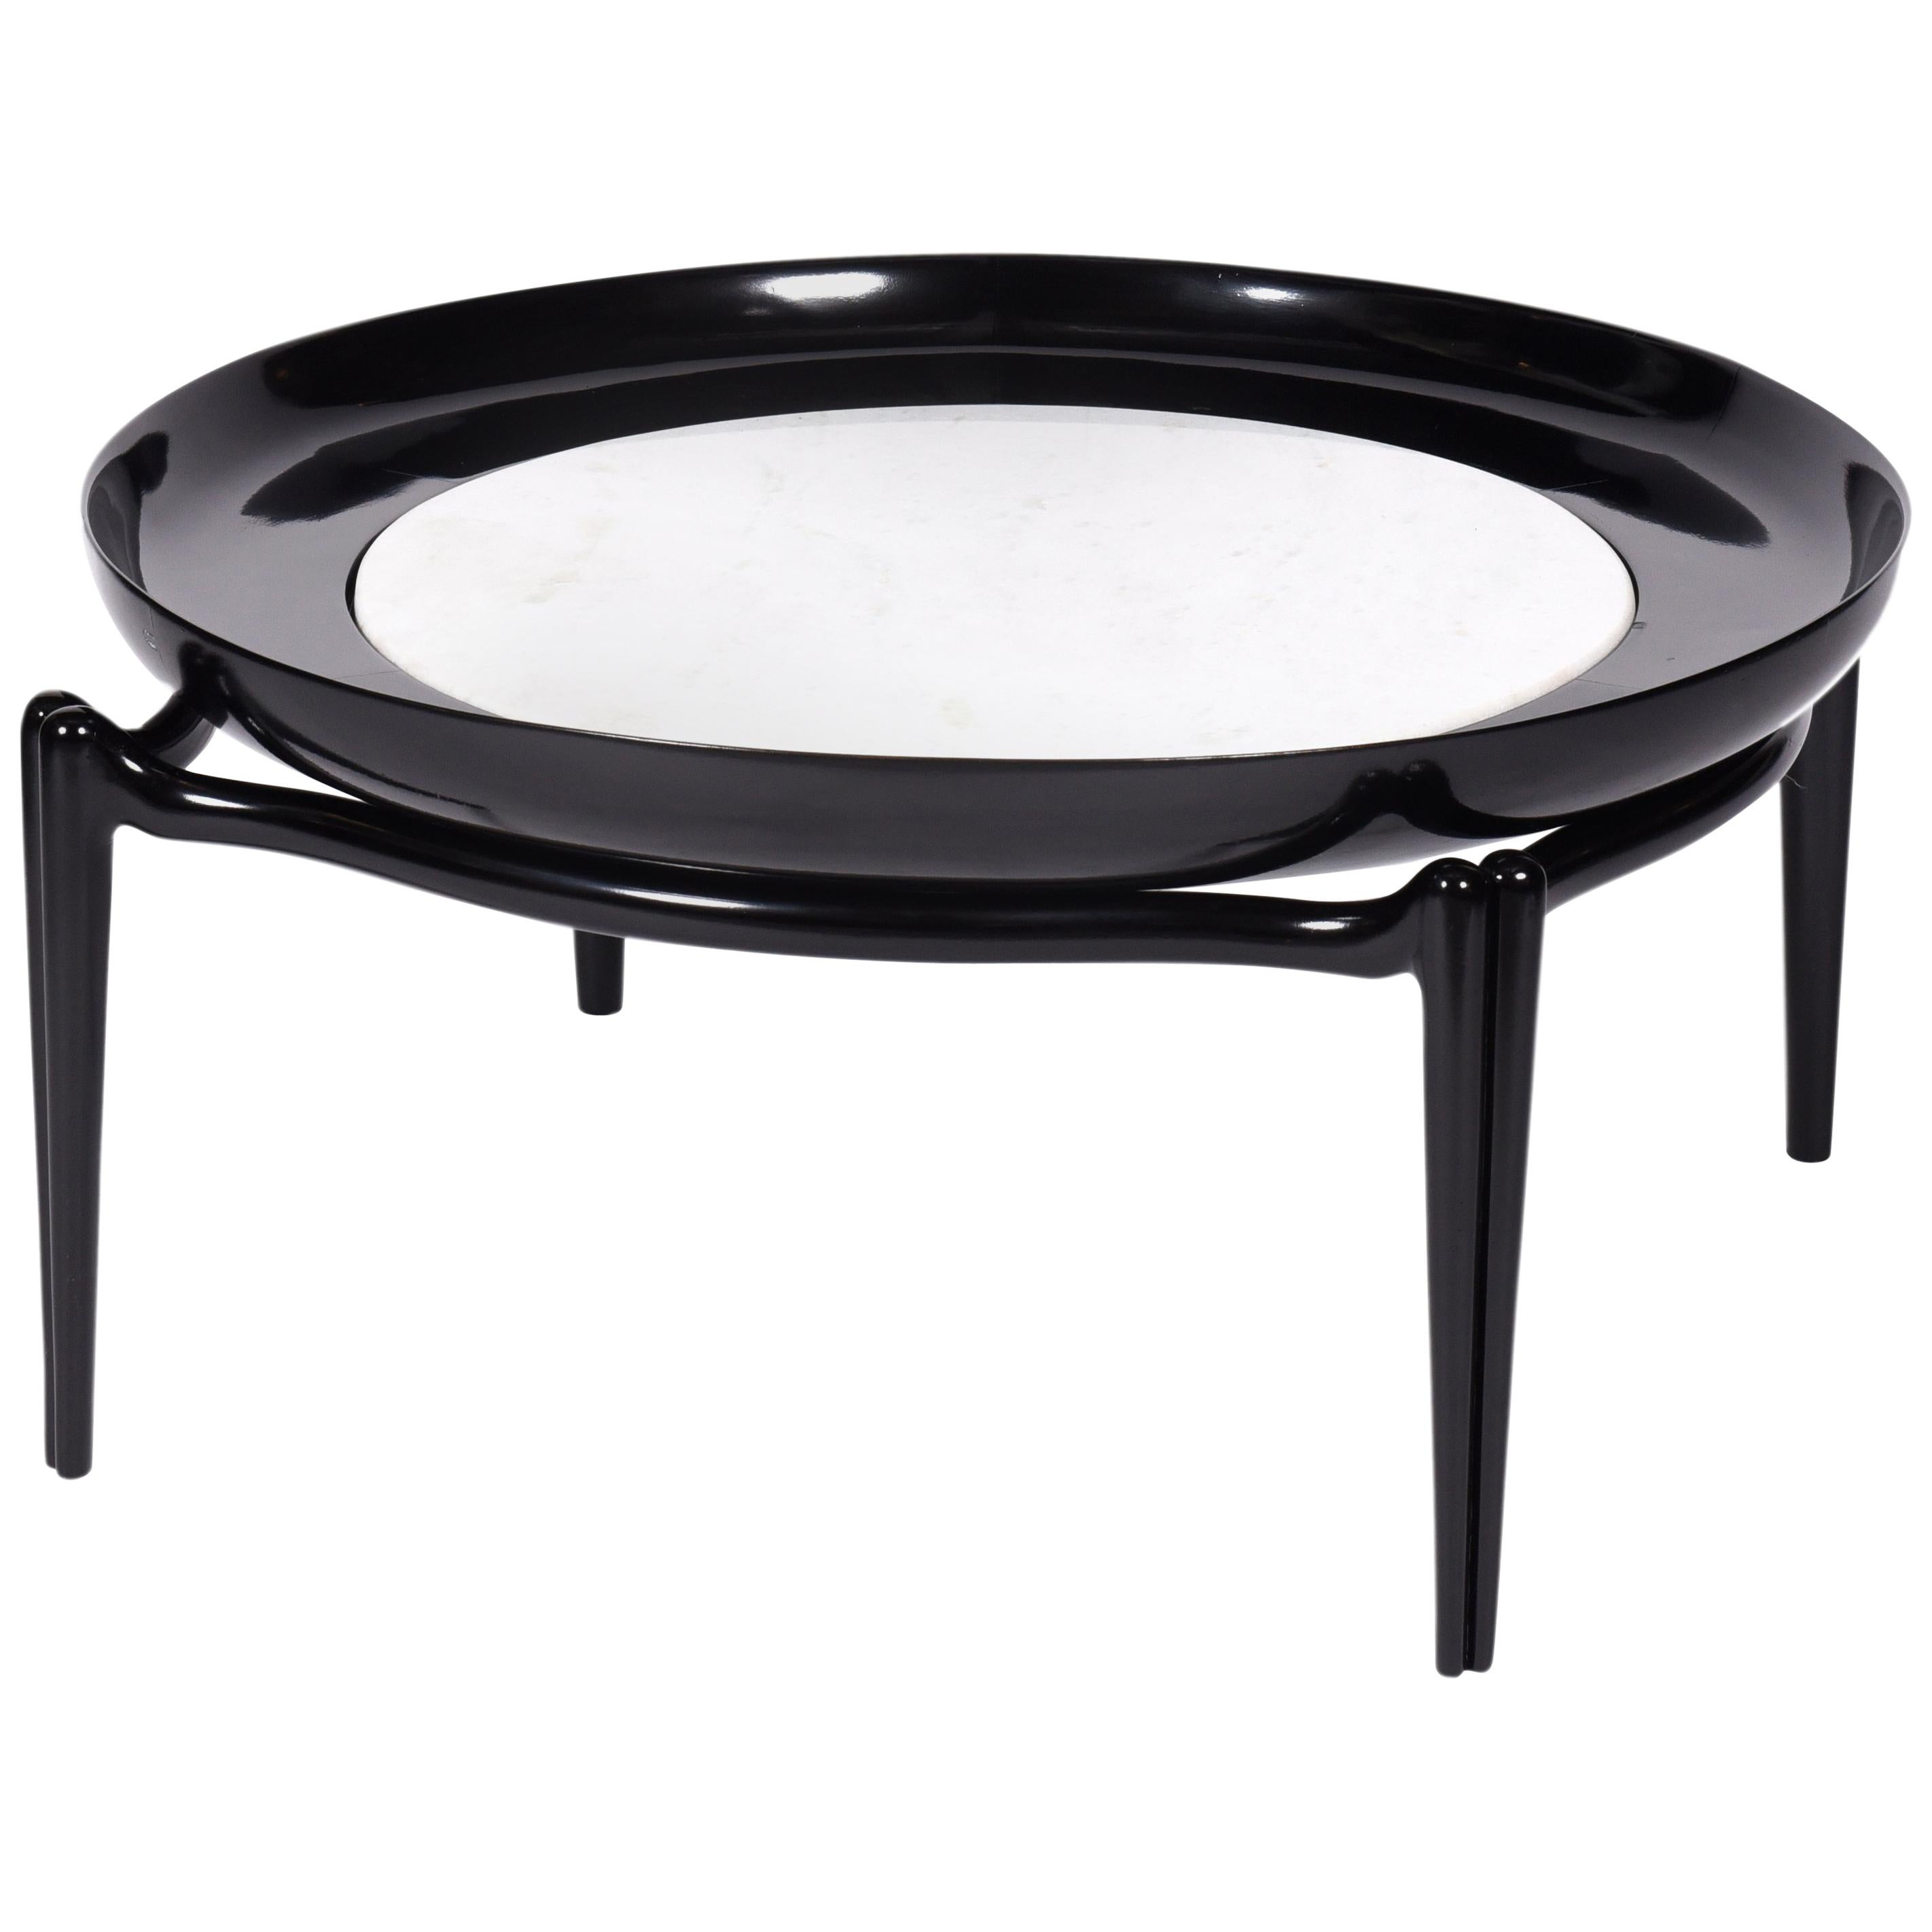 Giuseppe Scapinelli Midcentury Brazilian Coffee Table in Lacquered Table